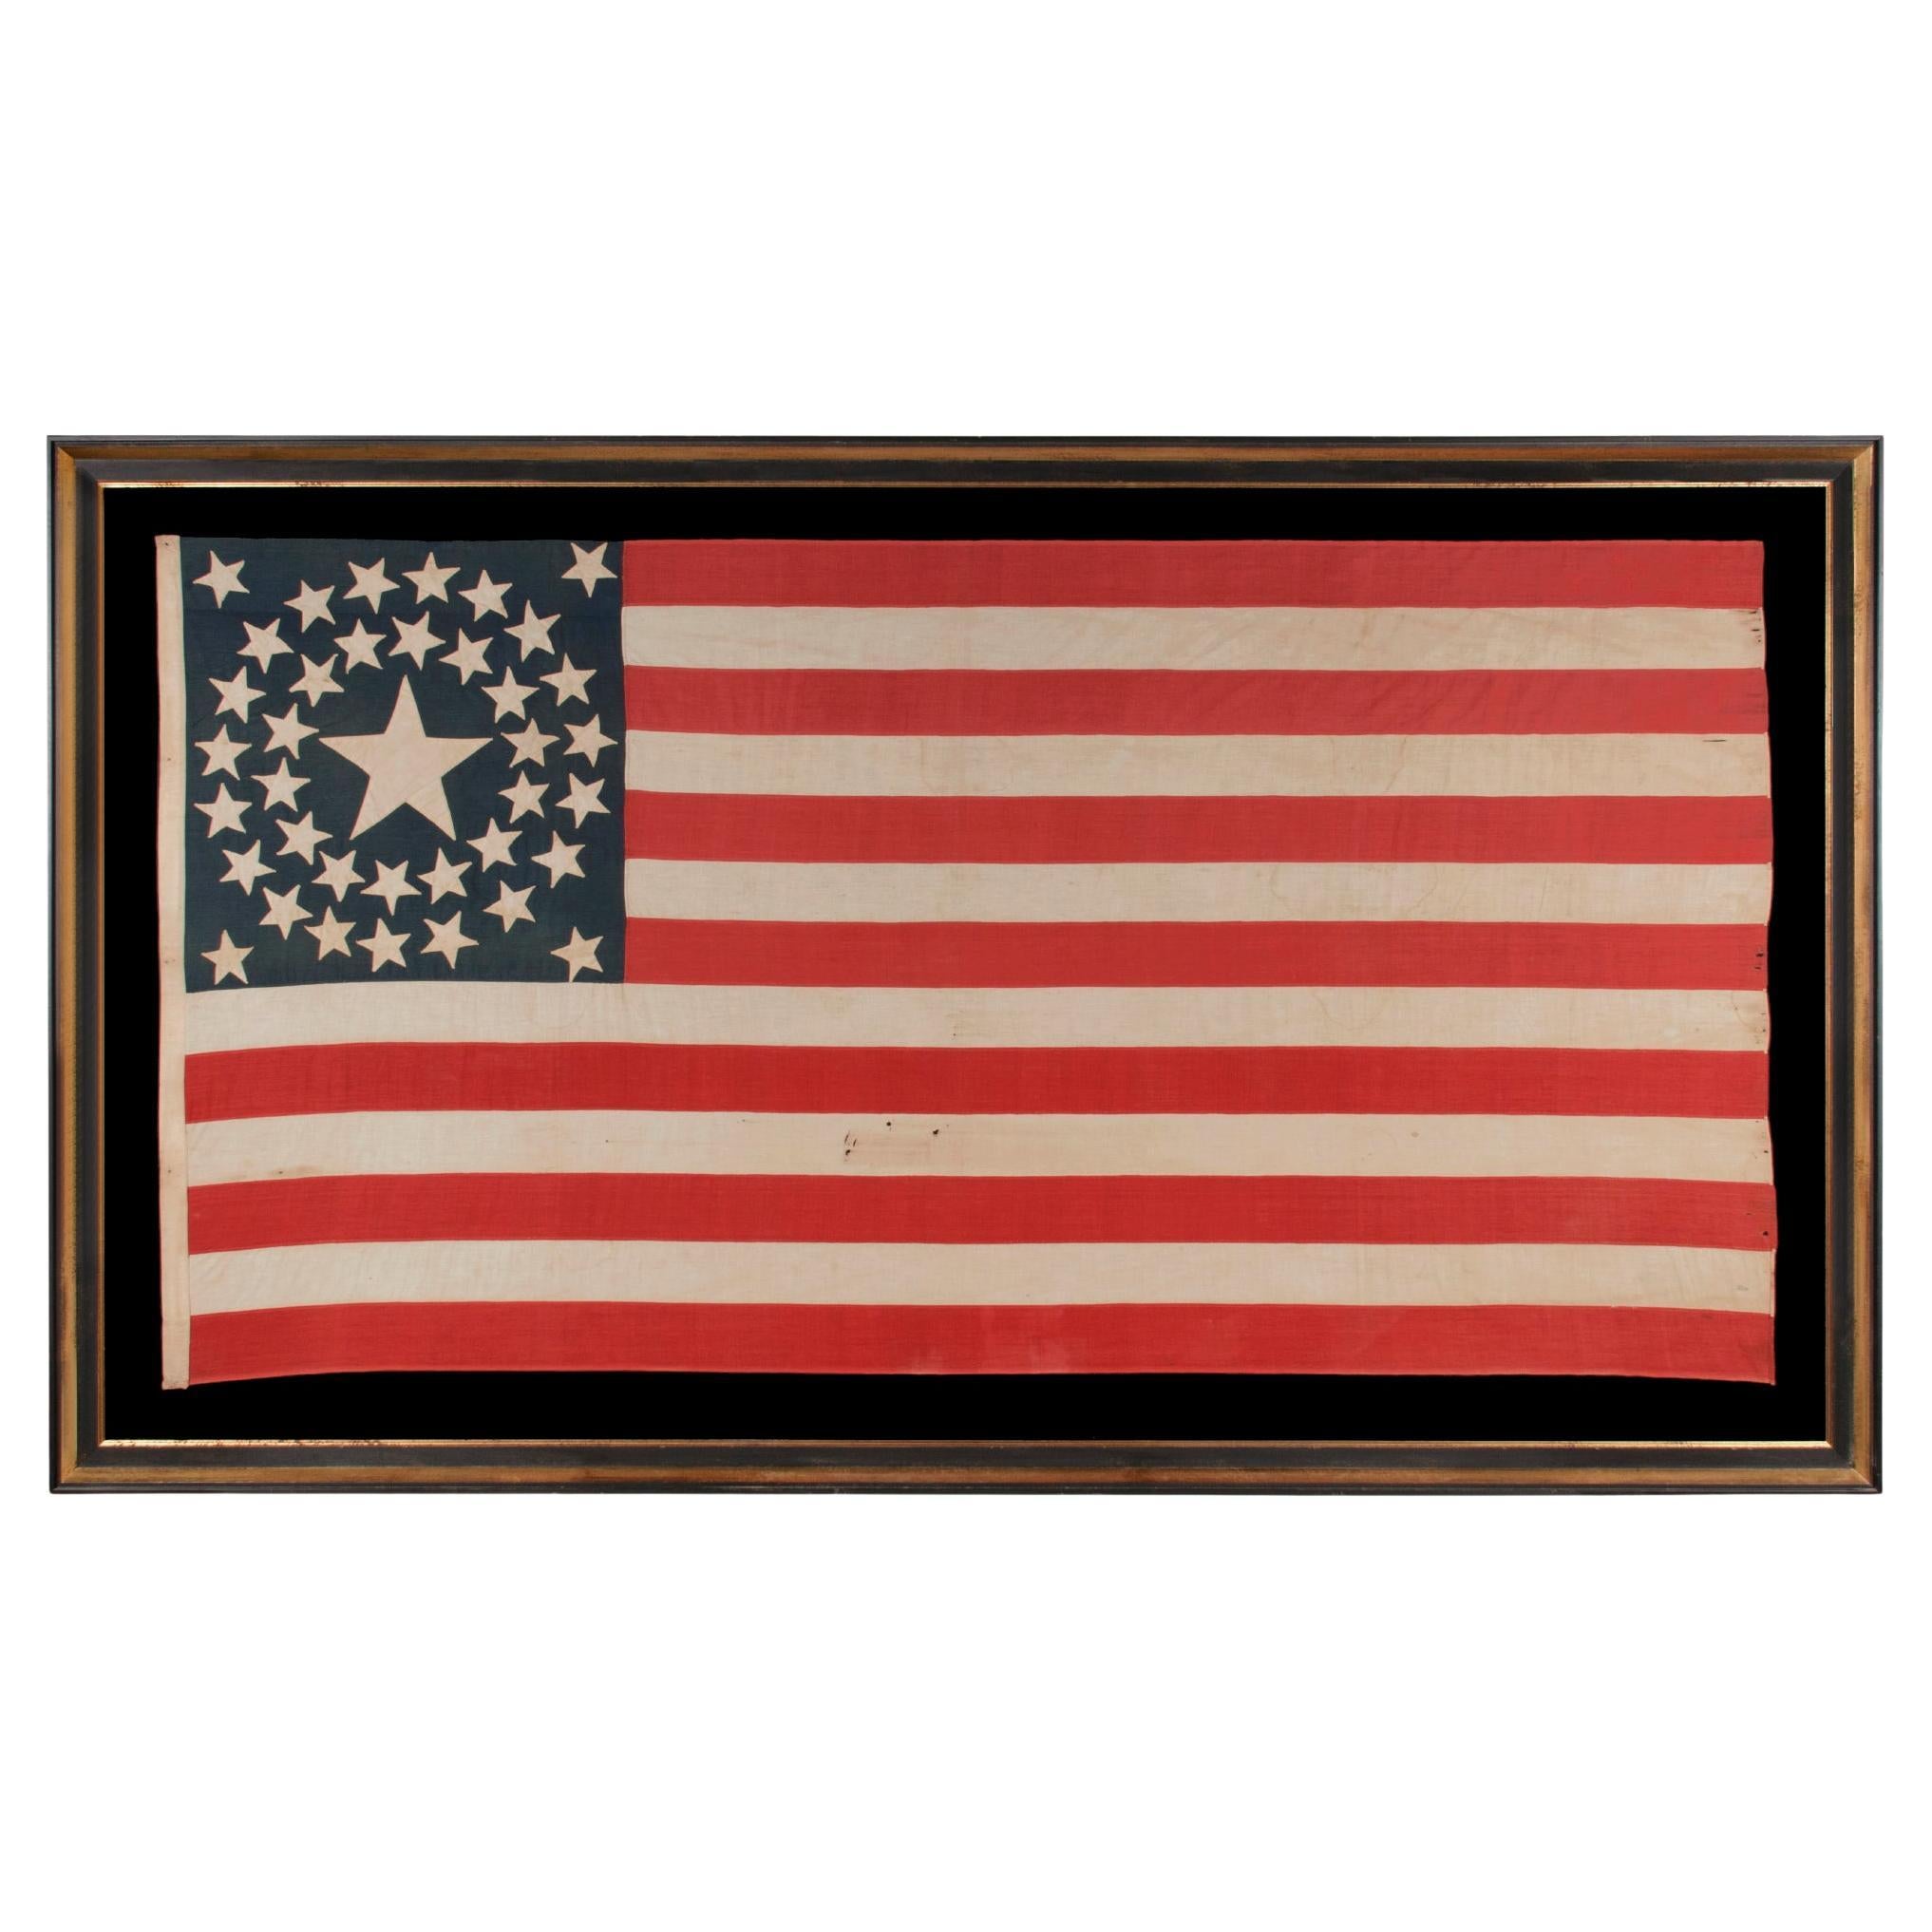 38 Star Antique Flag, Stars in Double Wreath Pattern, Colorado Statehood 1876-89